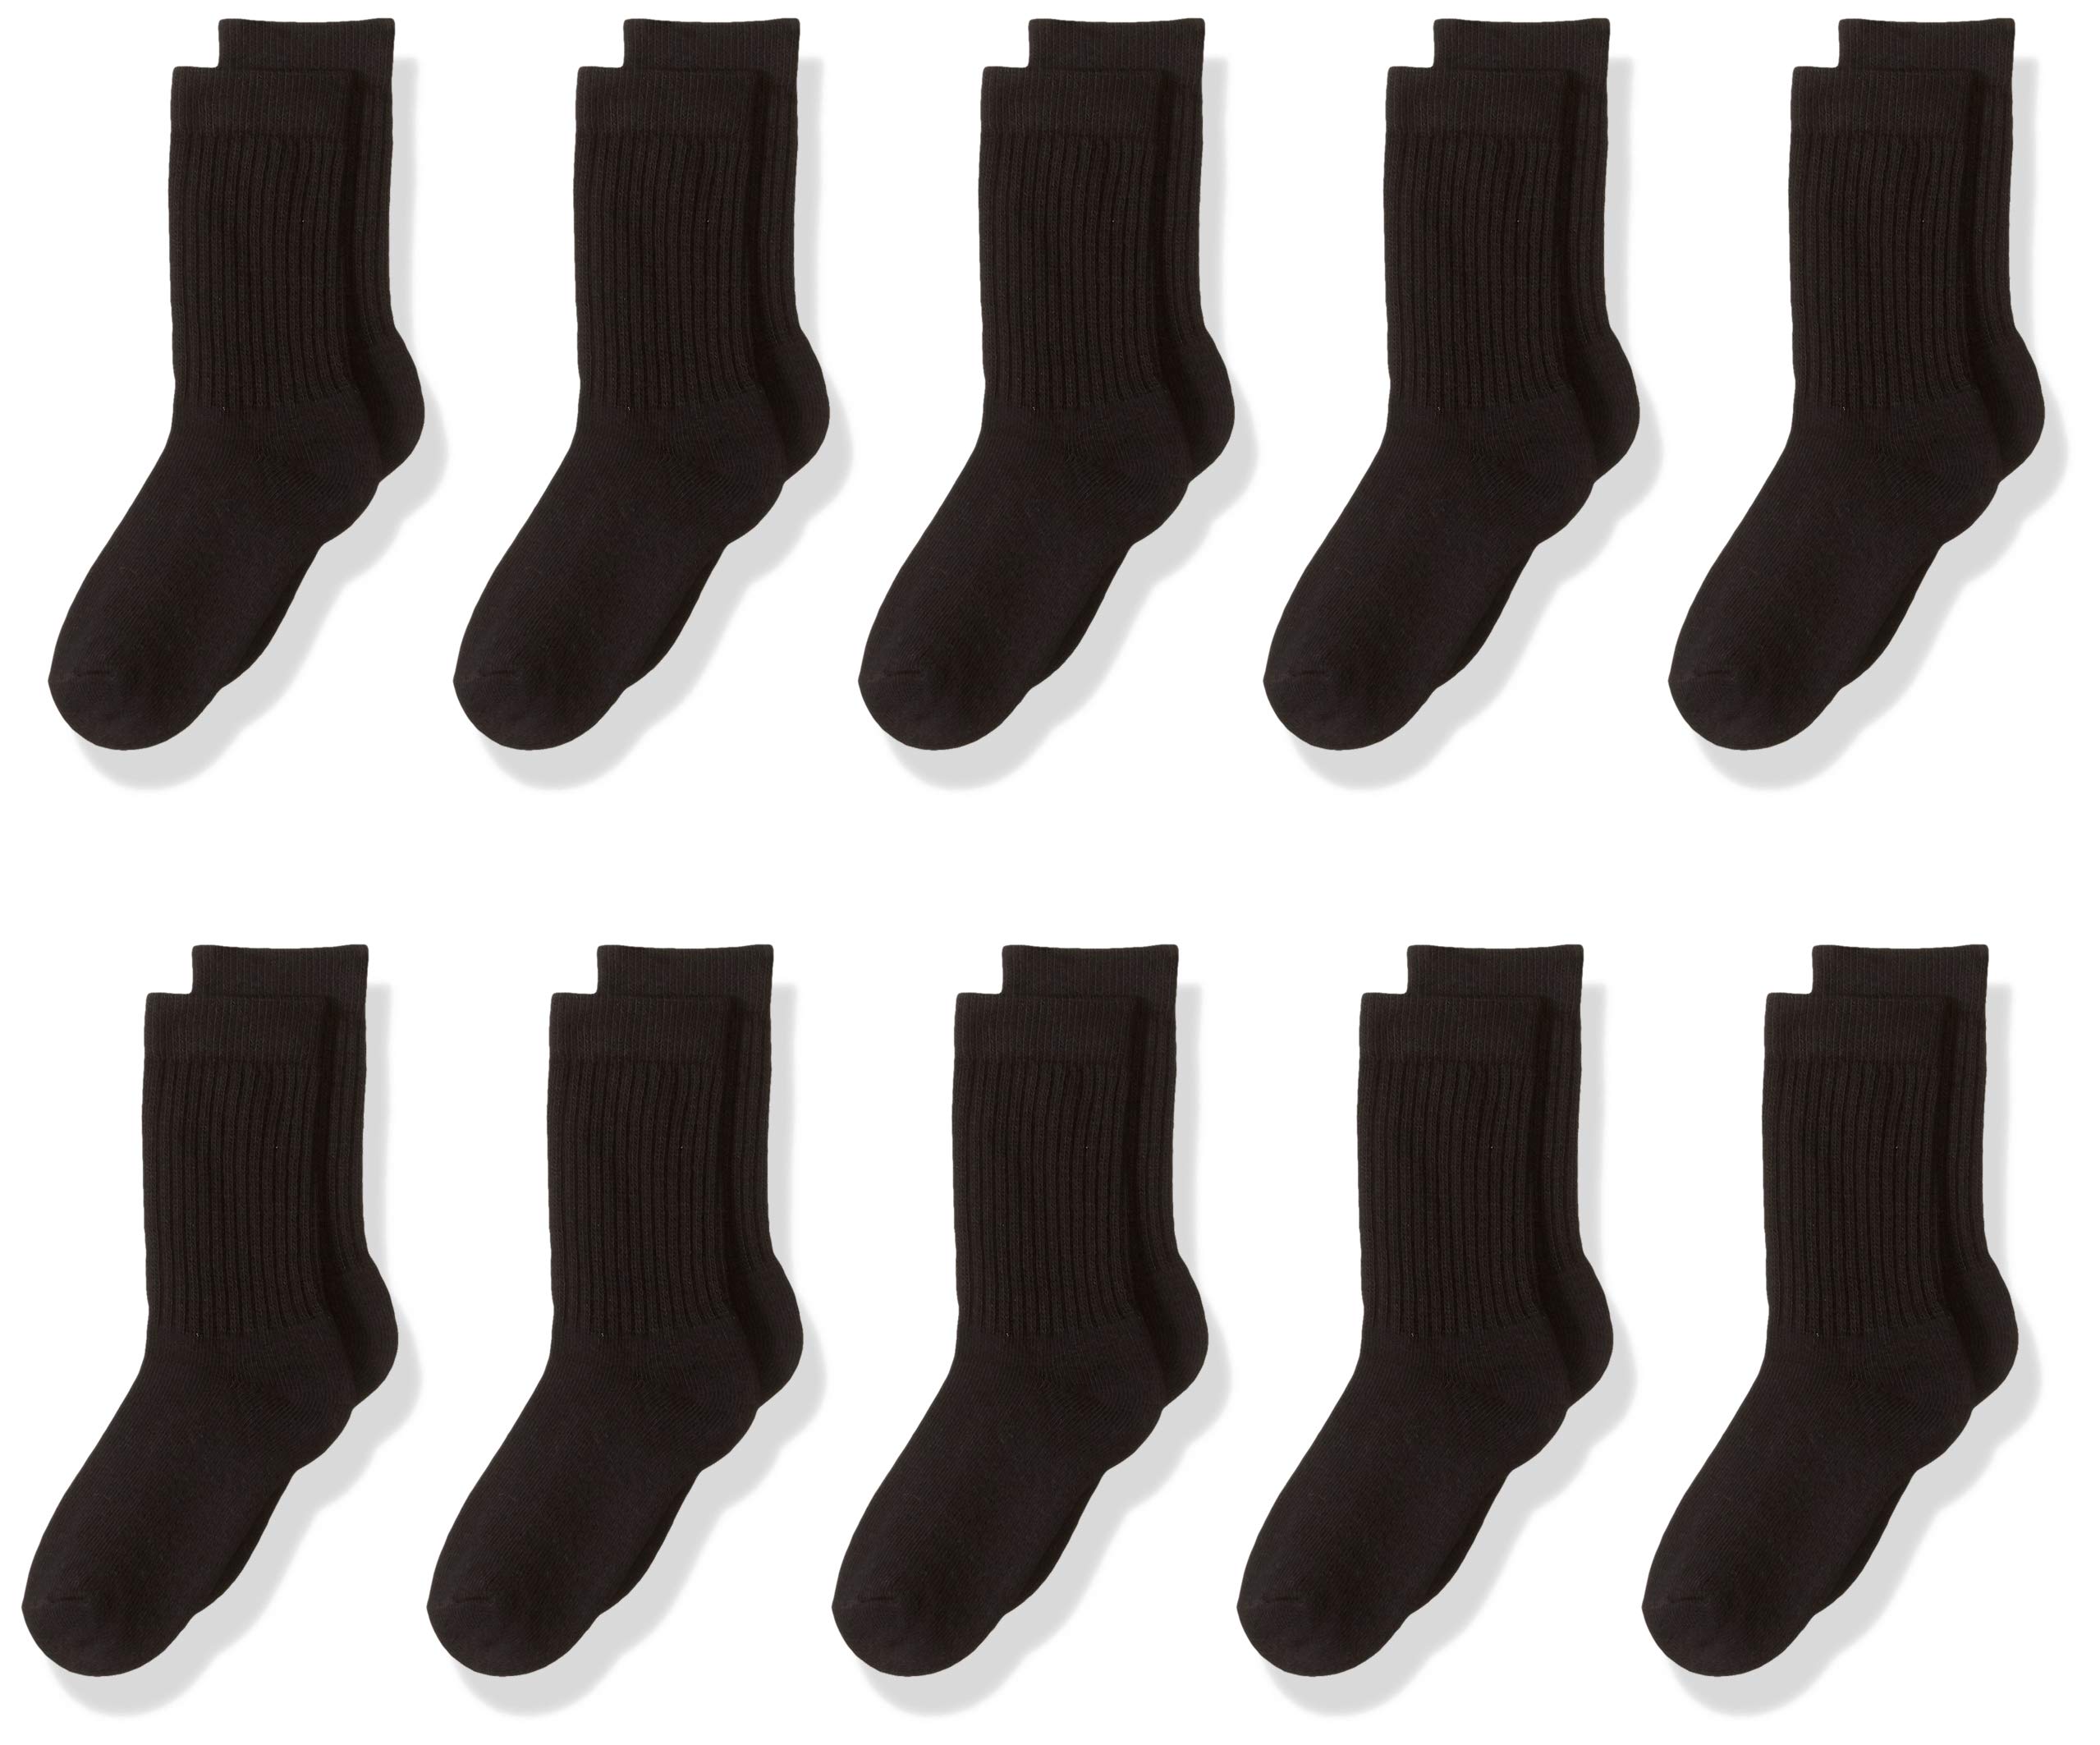 Amazon Essentials Boys and Toddlers' Cotton Crew Sock, 10 Pairs